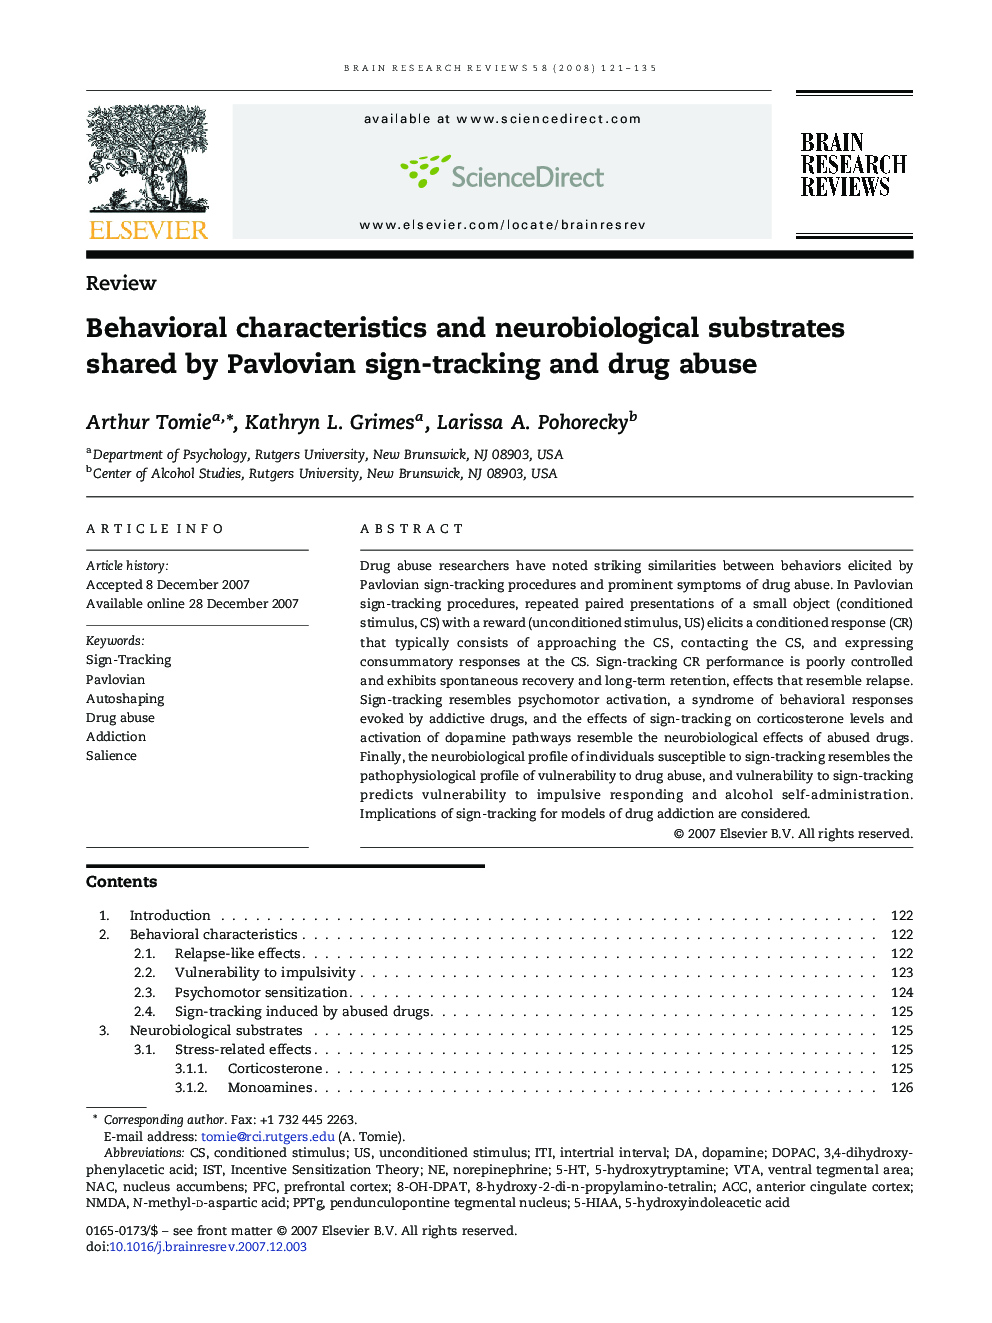 Behavioral characteristics and neurobiological substrates shared by Pavlovian sign-tracking and drug abuse